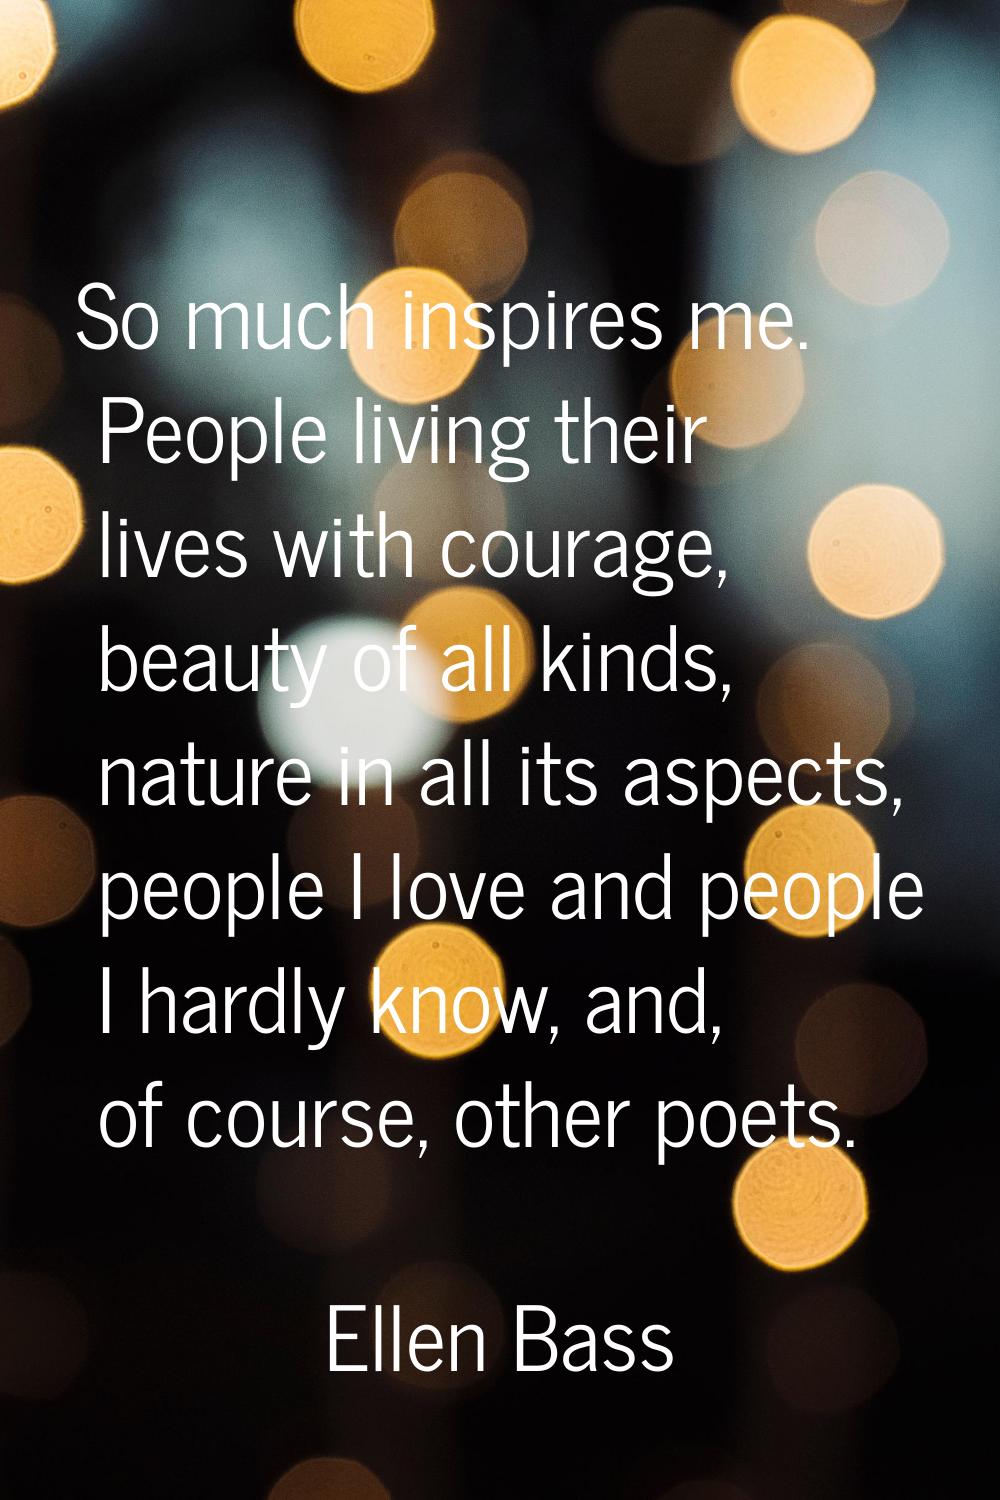 So much inspires me. People living their lives with courage, beauty of all kinds, nature in all its